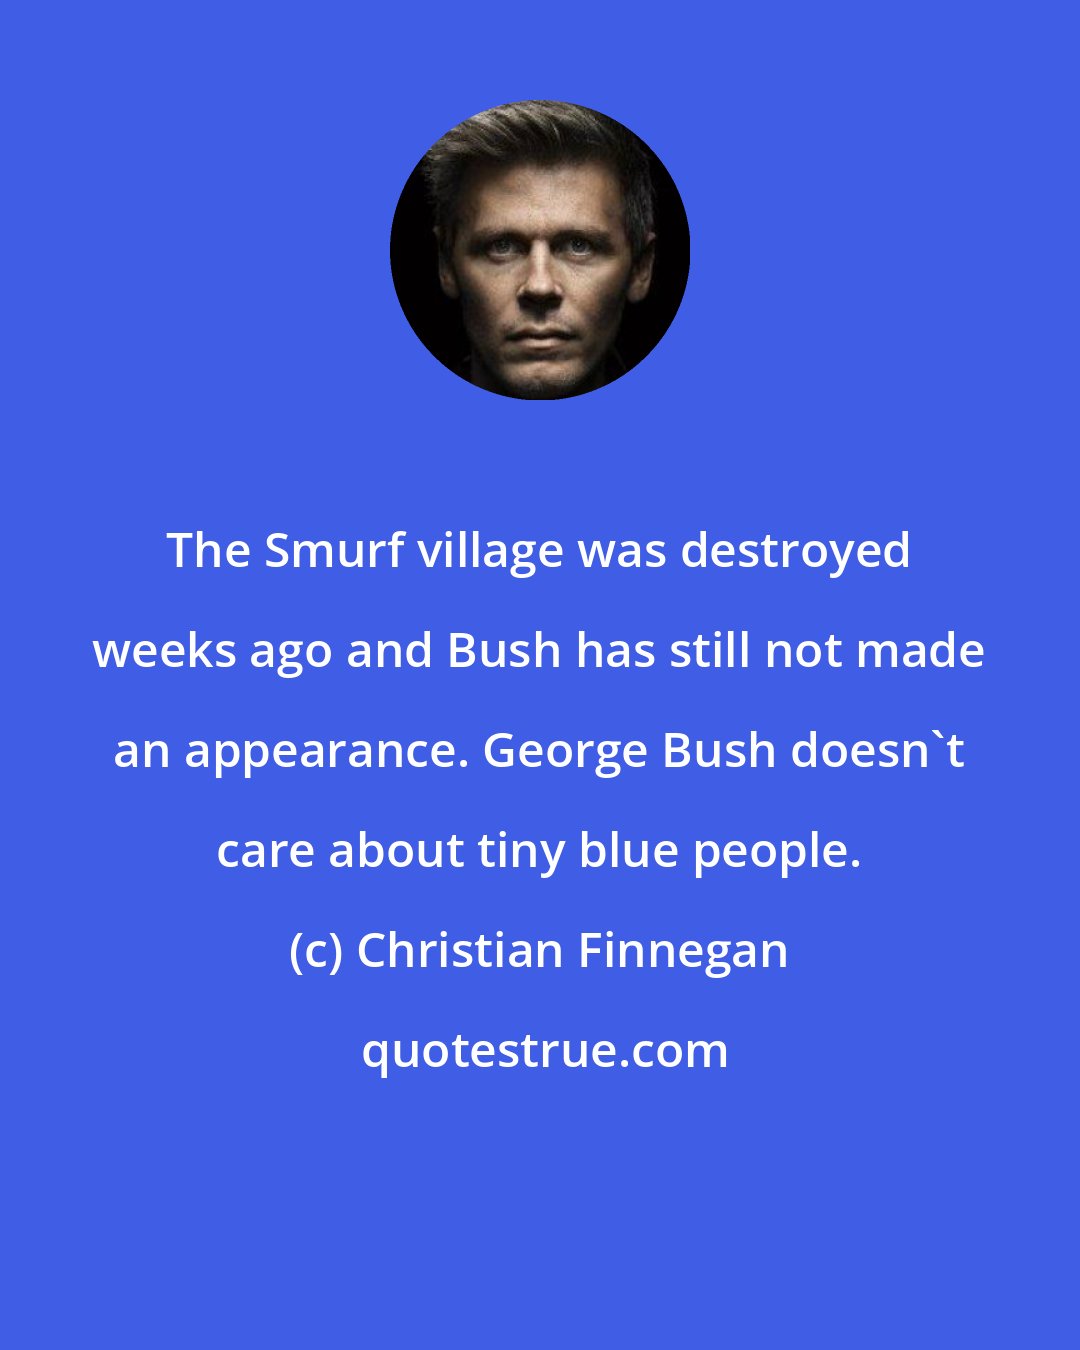 Christian Finnegan: The Smurf village was destroyed weeks ago and Bush has still not made an appearance. George Bush doesn't care about tiny blue people.